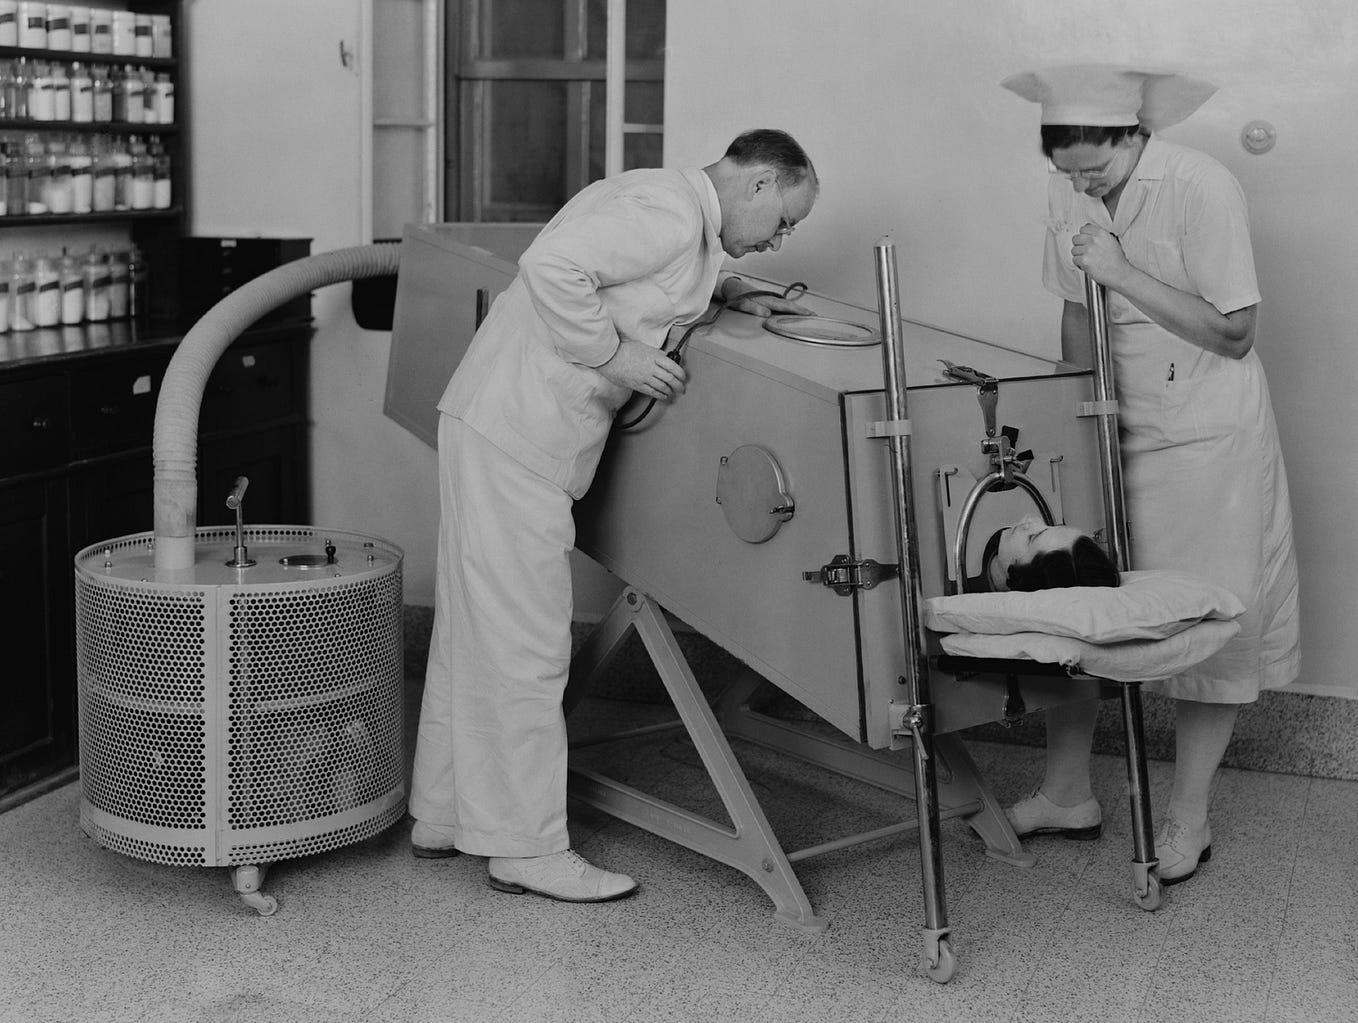 What You Didn’t Know About Polio